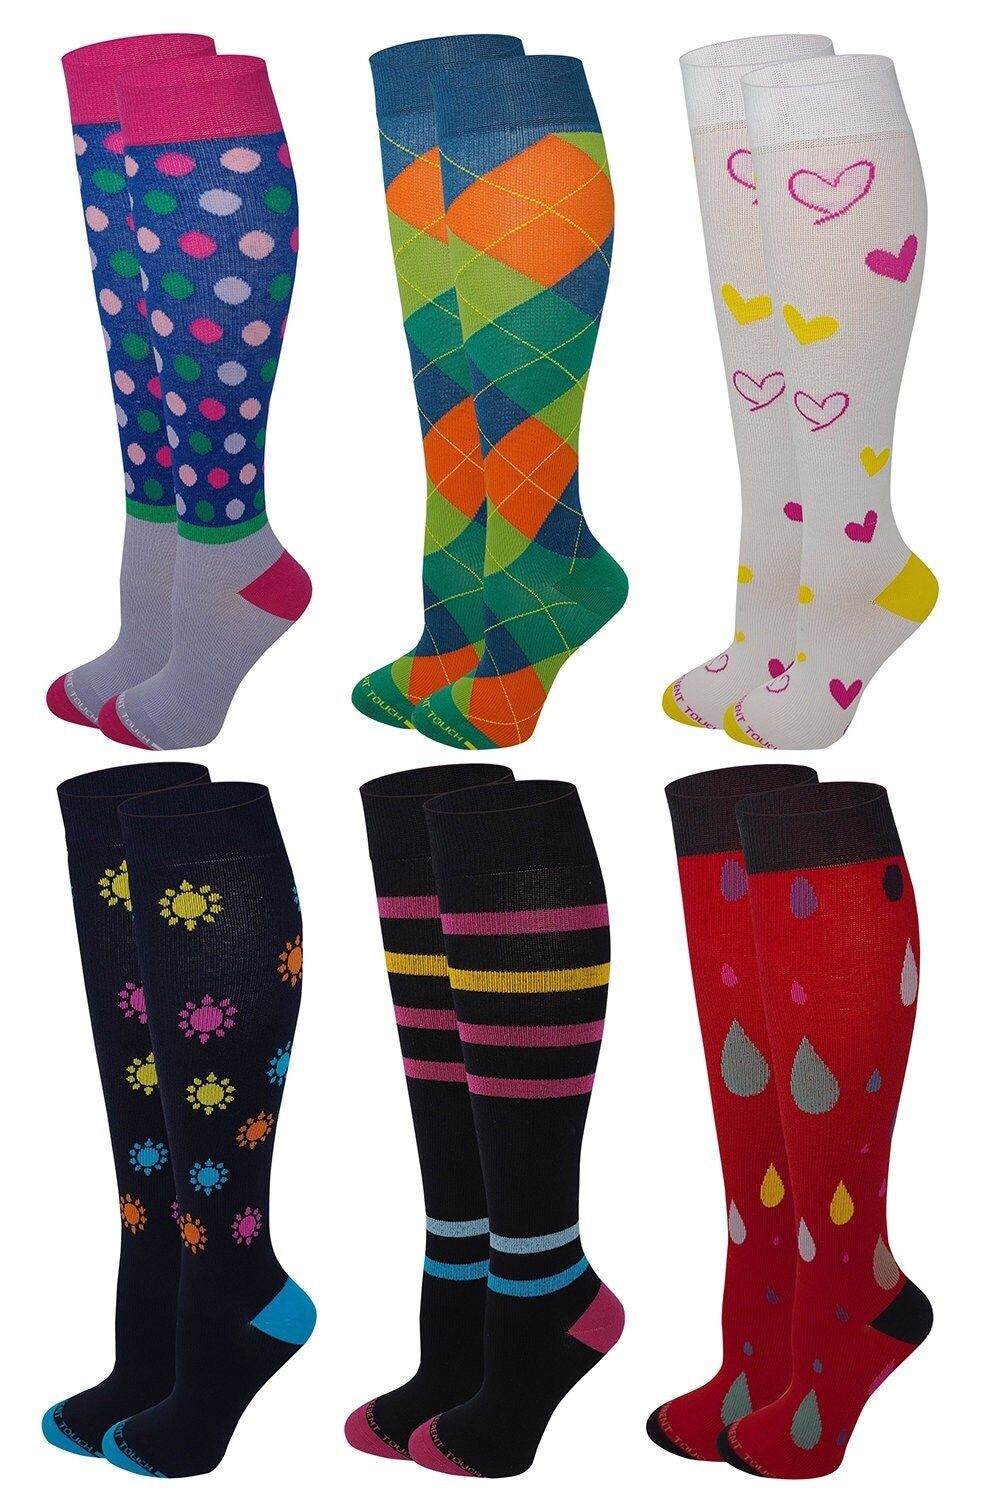 6 Pairs Women Graduated Everyday Cotton Compression Knee High Socks 